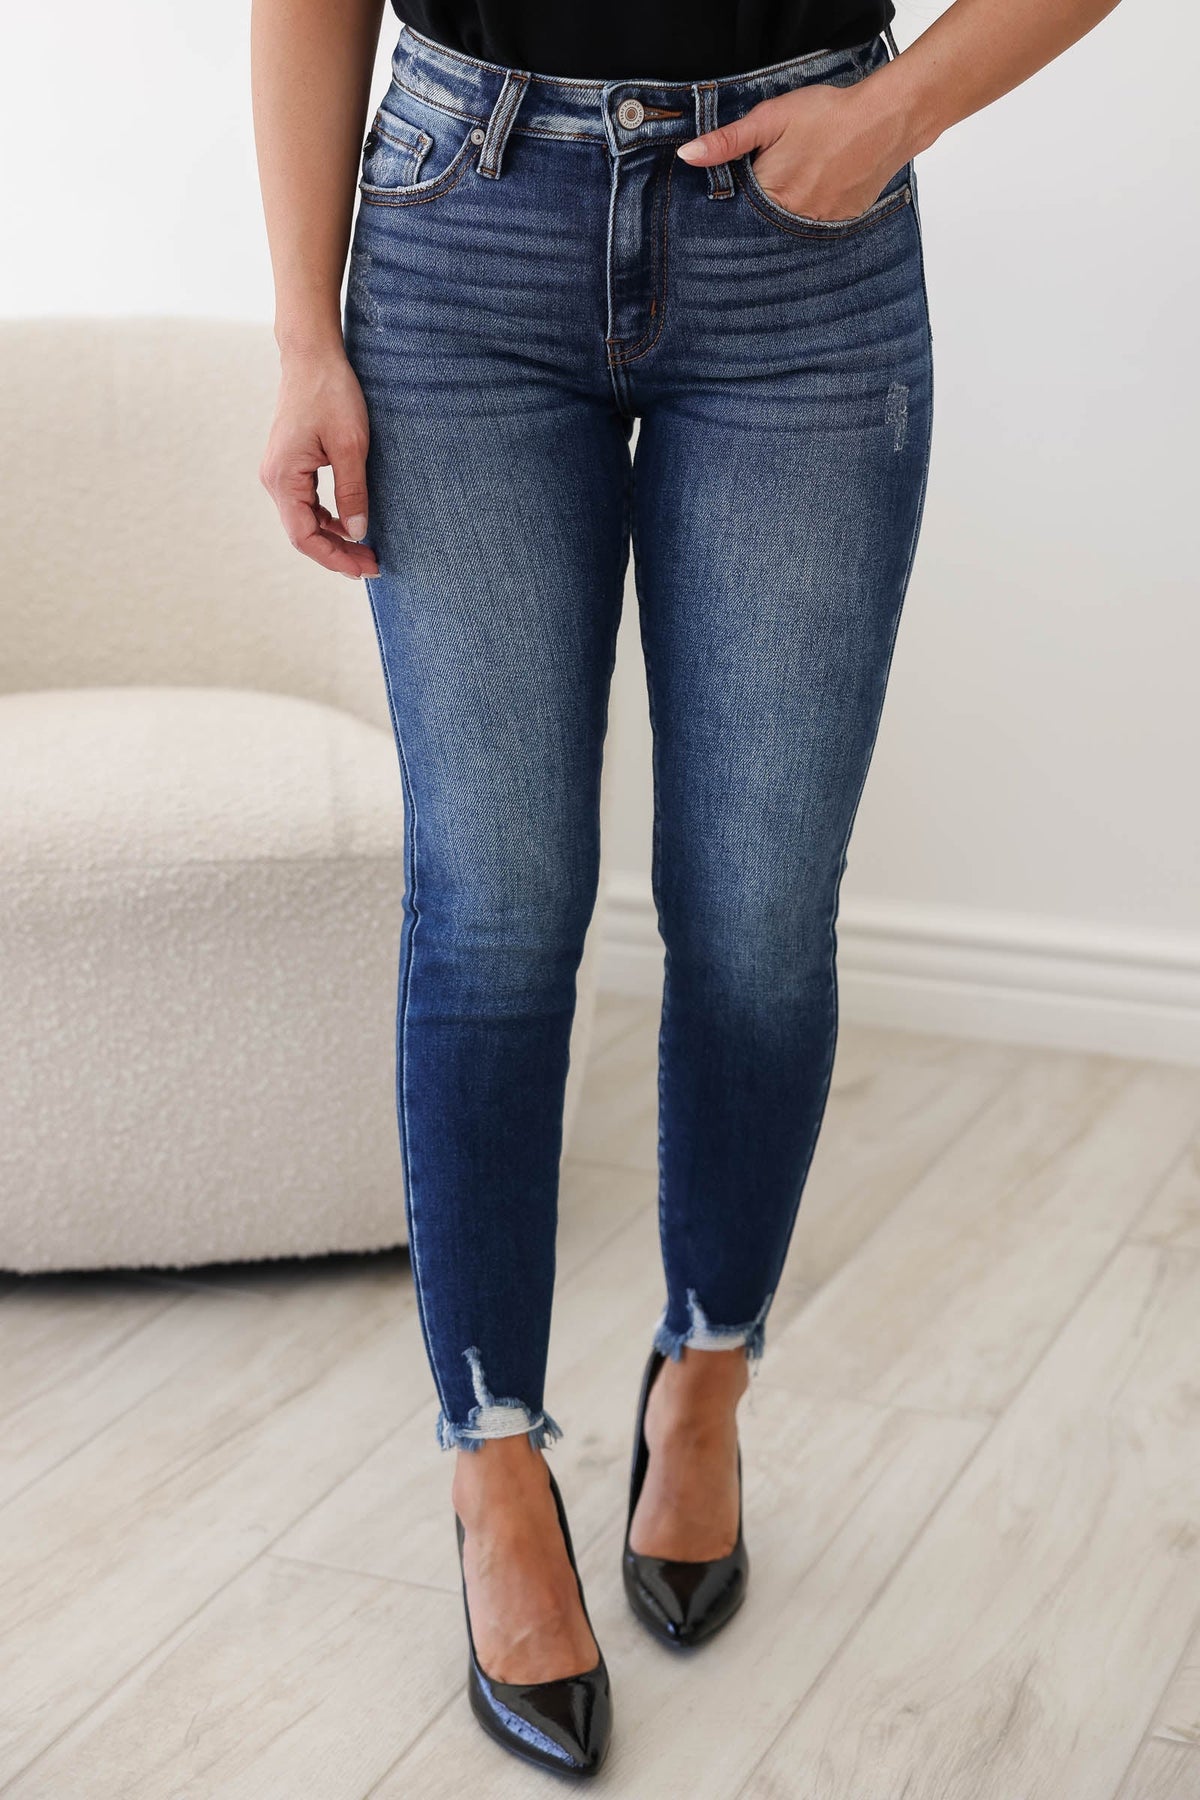 KANCAN Lucia Ankle Skinny Jeans - Dark Wash - Closet Candy Boutique